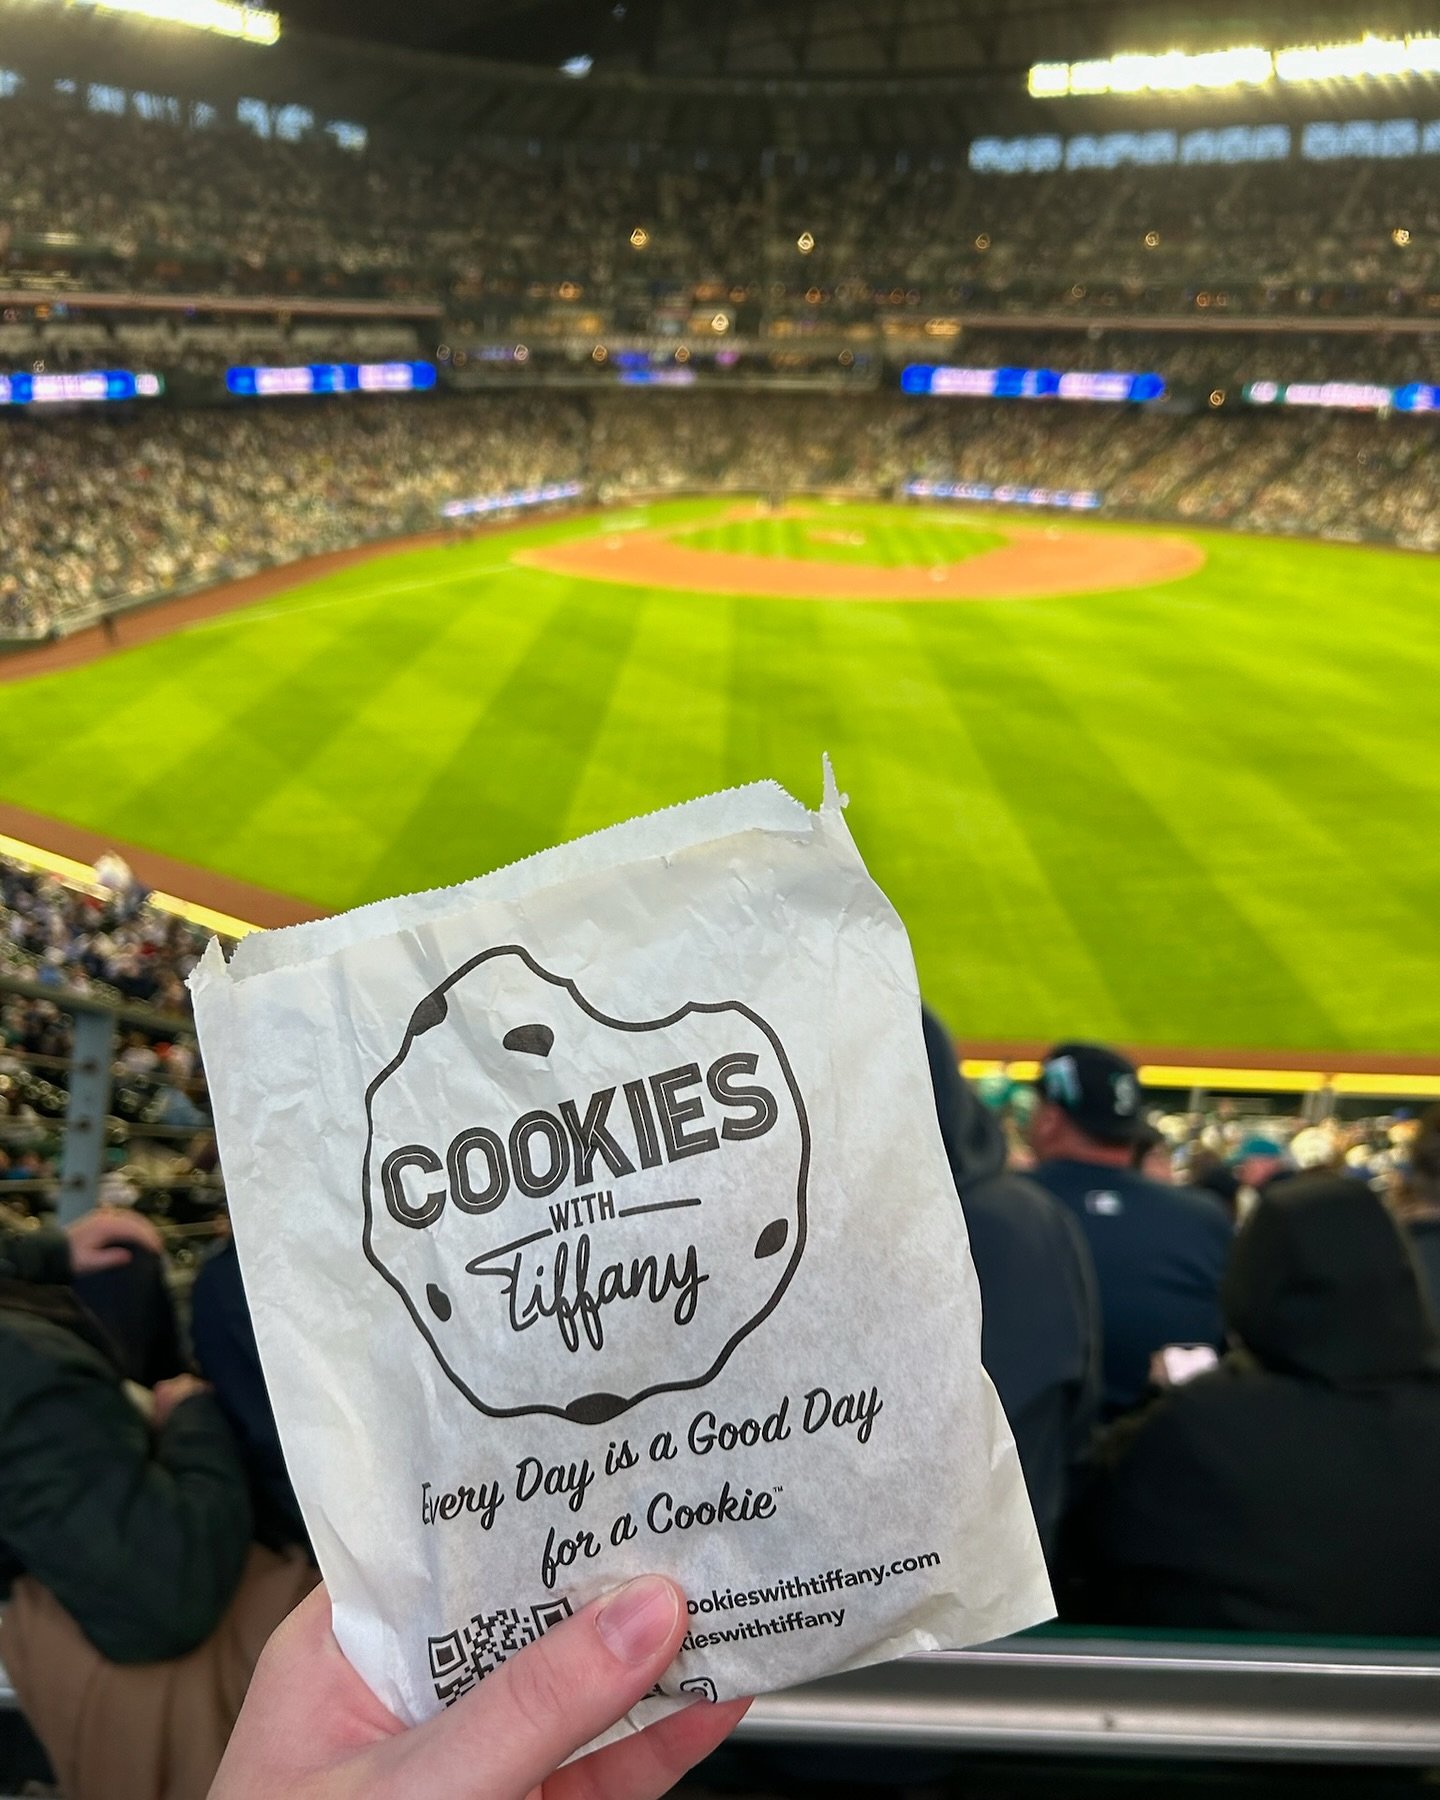 Friday Night at the Ballpark 🍪 ⚾️ The @mariners are back in town! Get your cookie and enjoy the action (and the sunshine)!

Enjoy Cookies With Tiffany at @tmobilepark in sections 133, 214 (Club Level) and 316!

#CookiesWithTiffany #fridaynight #base